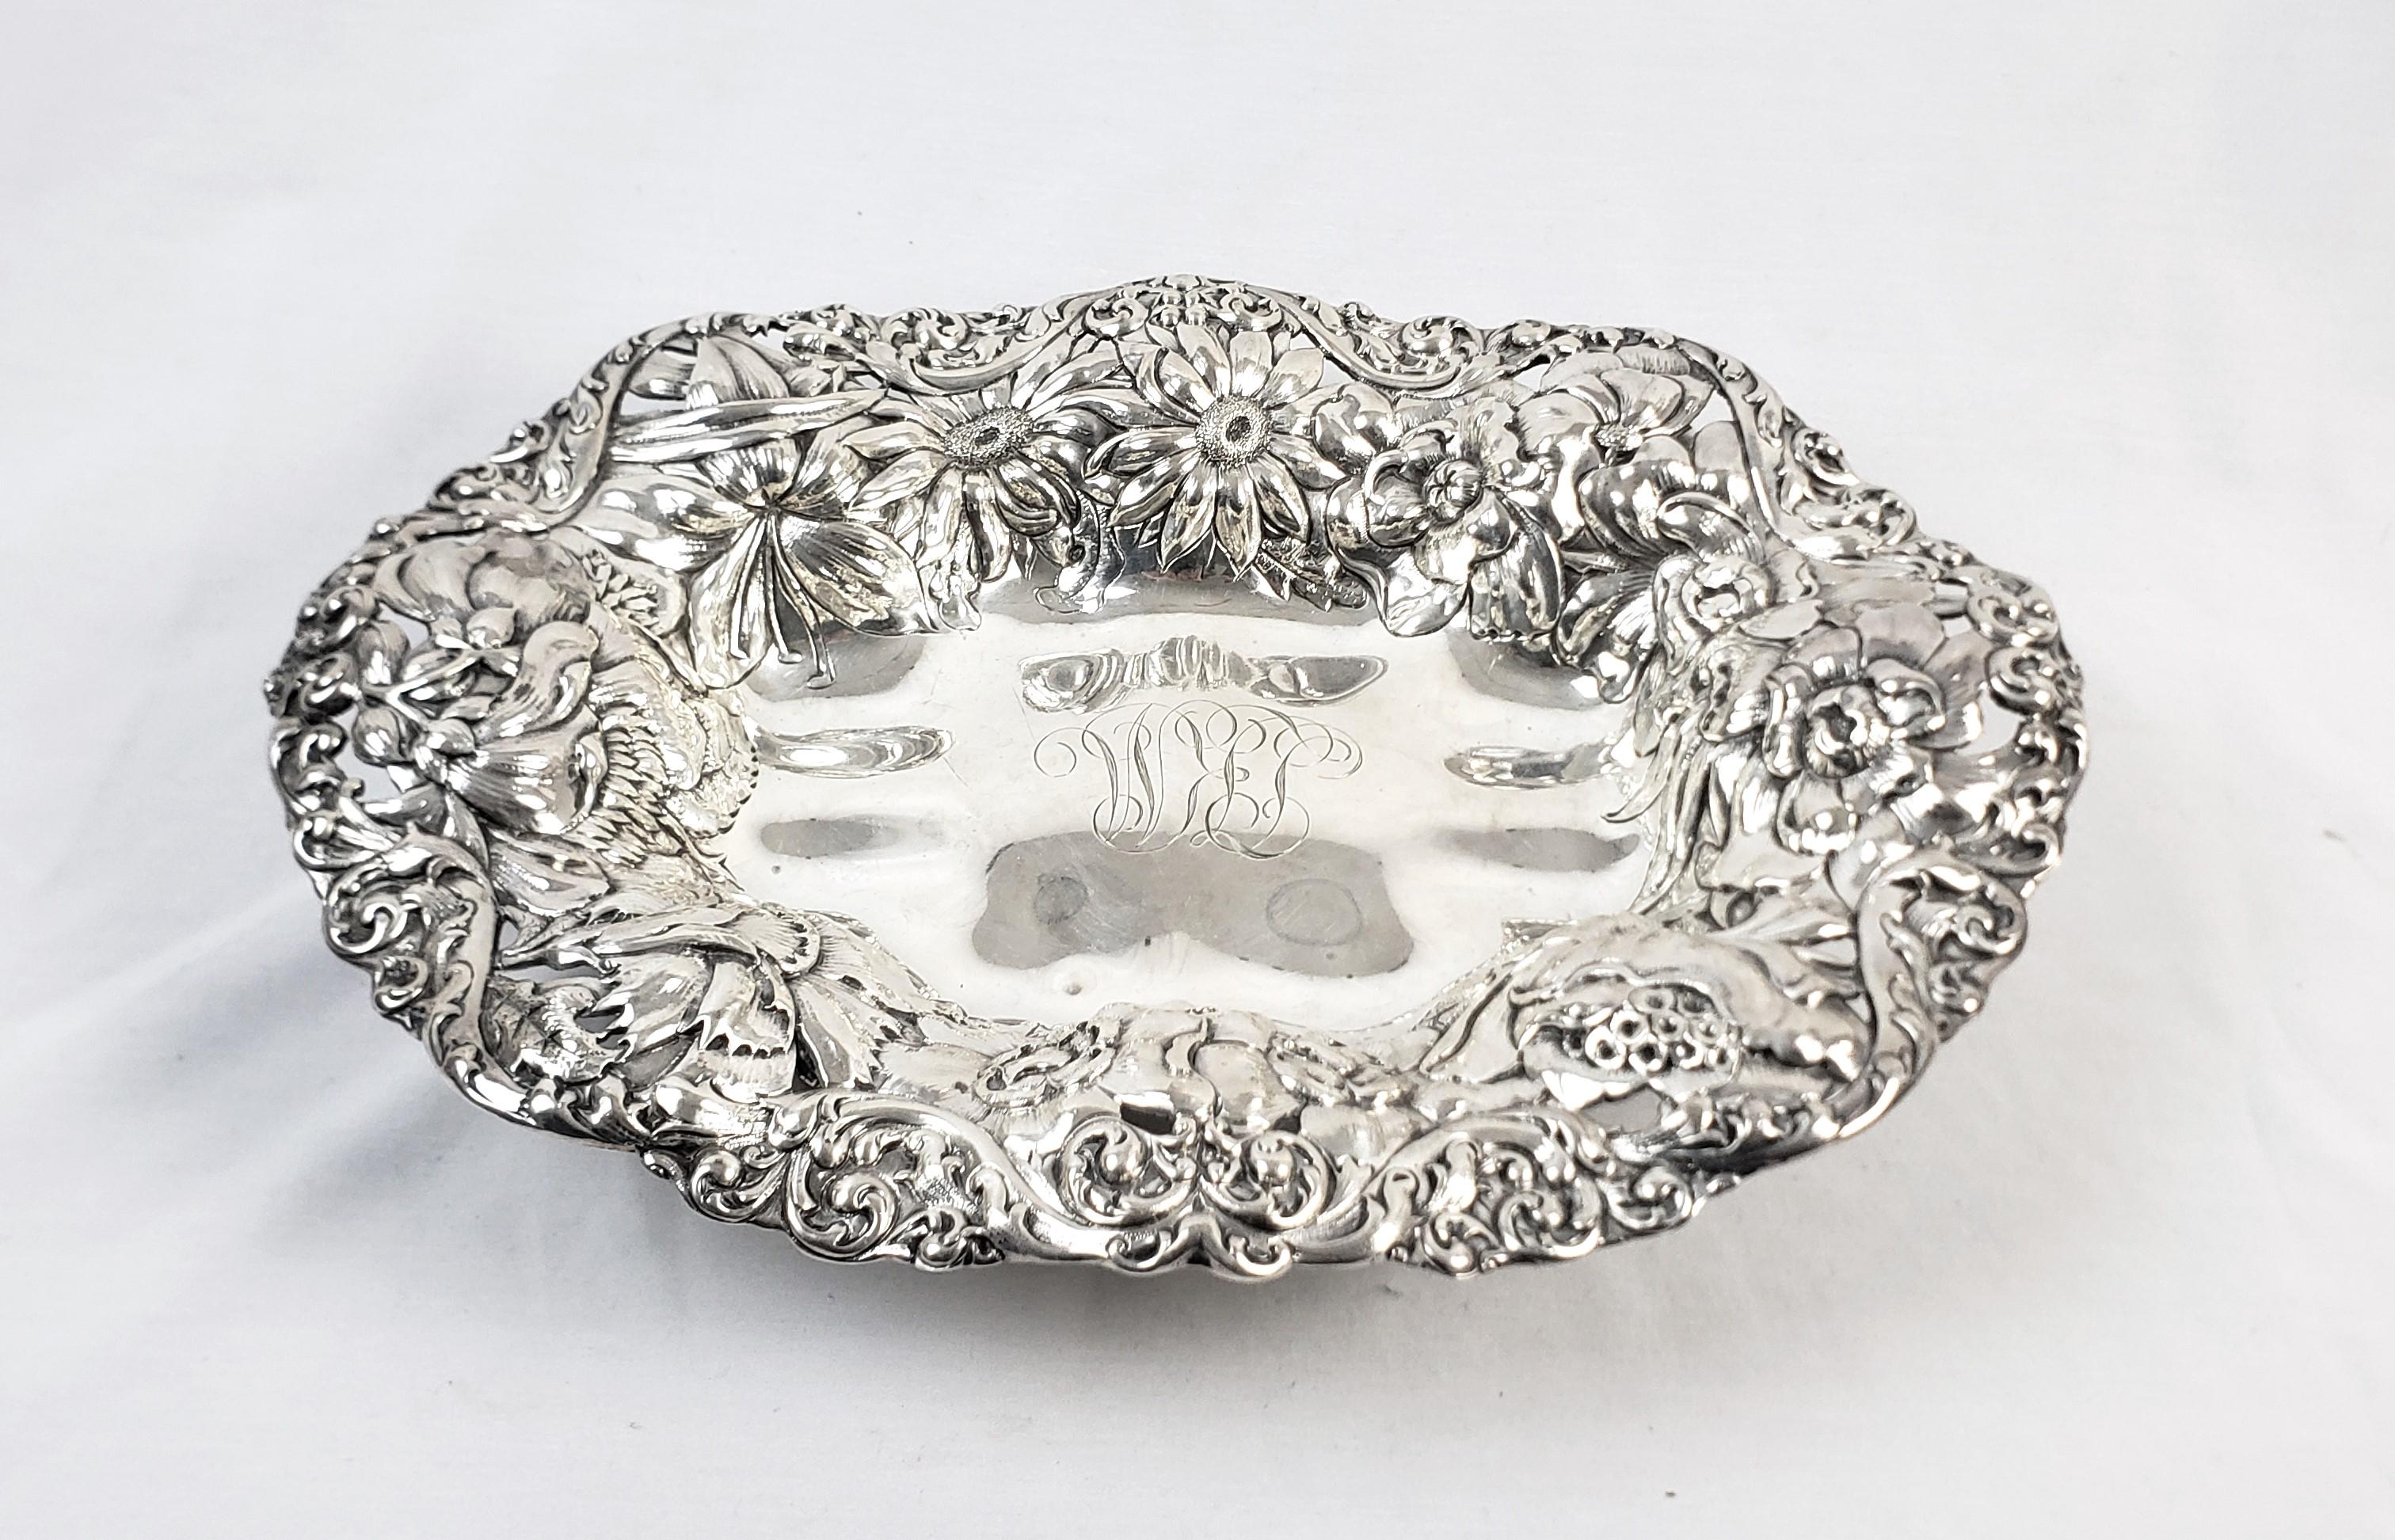 20th Century Antique Gorham Sterling Silver Bowl with Ornate Chased Floral Decoration For Sale